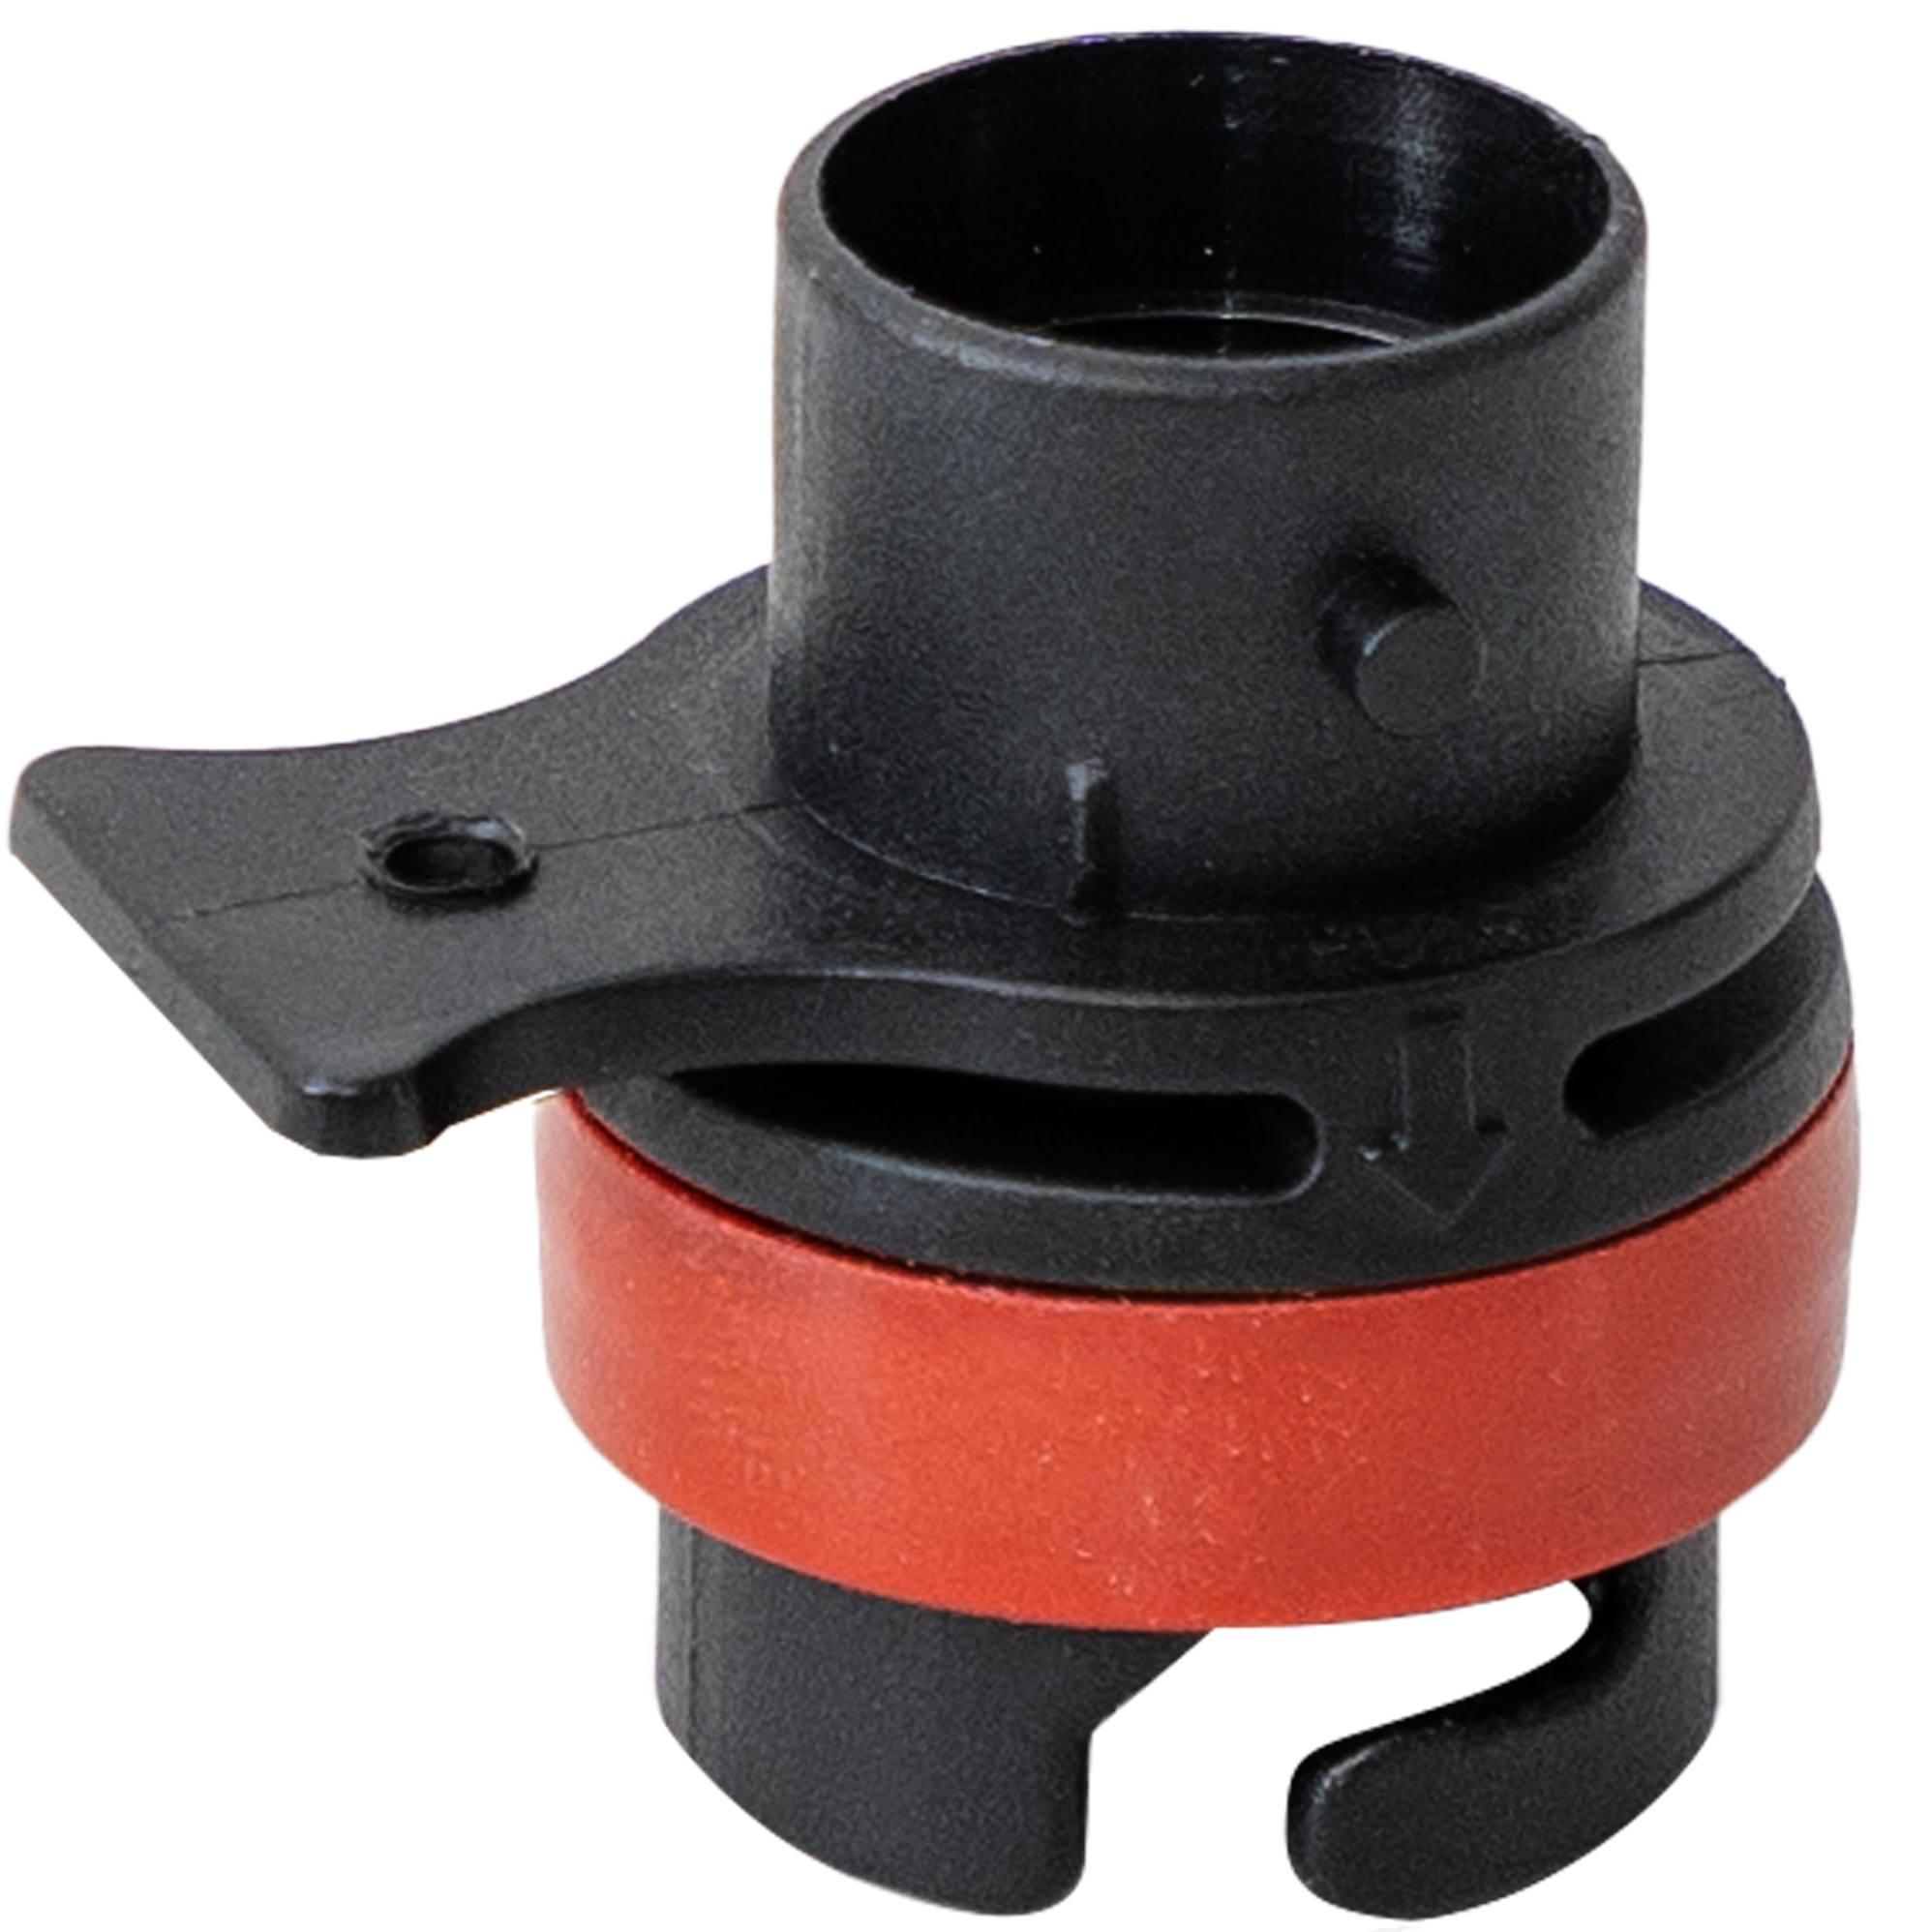 Valve pump adapter for Kite/Wing Duotone